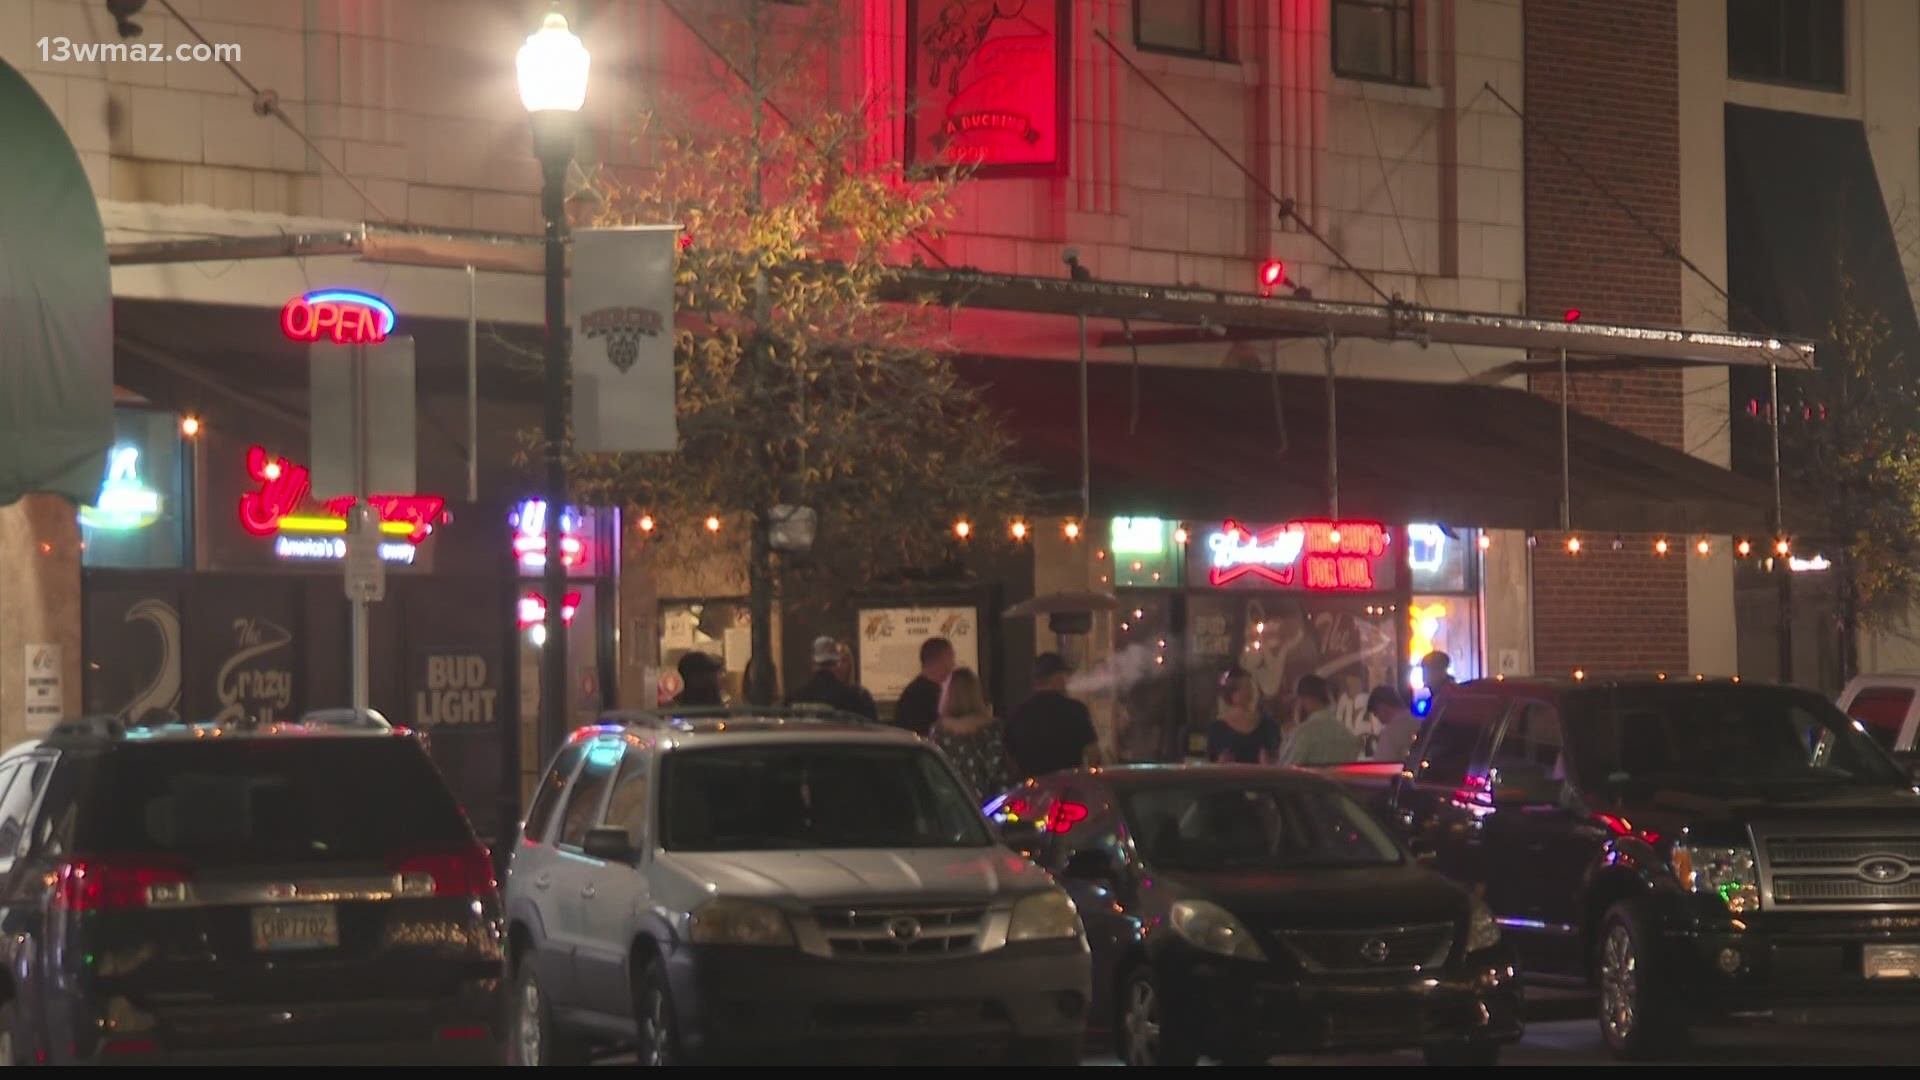 Several bars downtown say they disagree with the order.